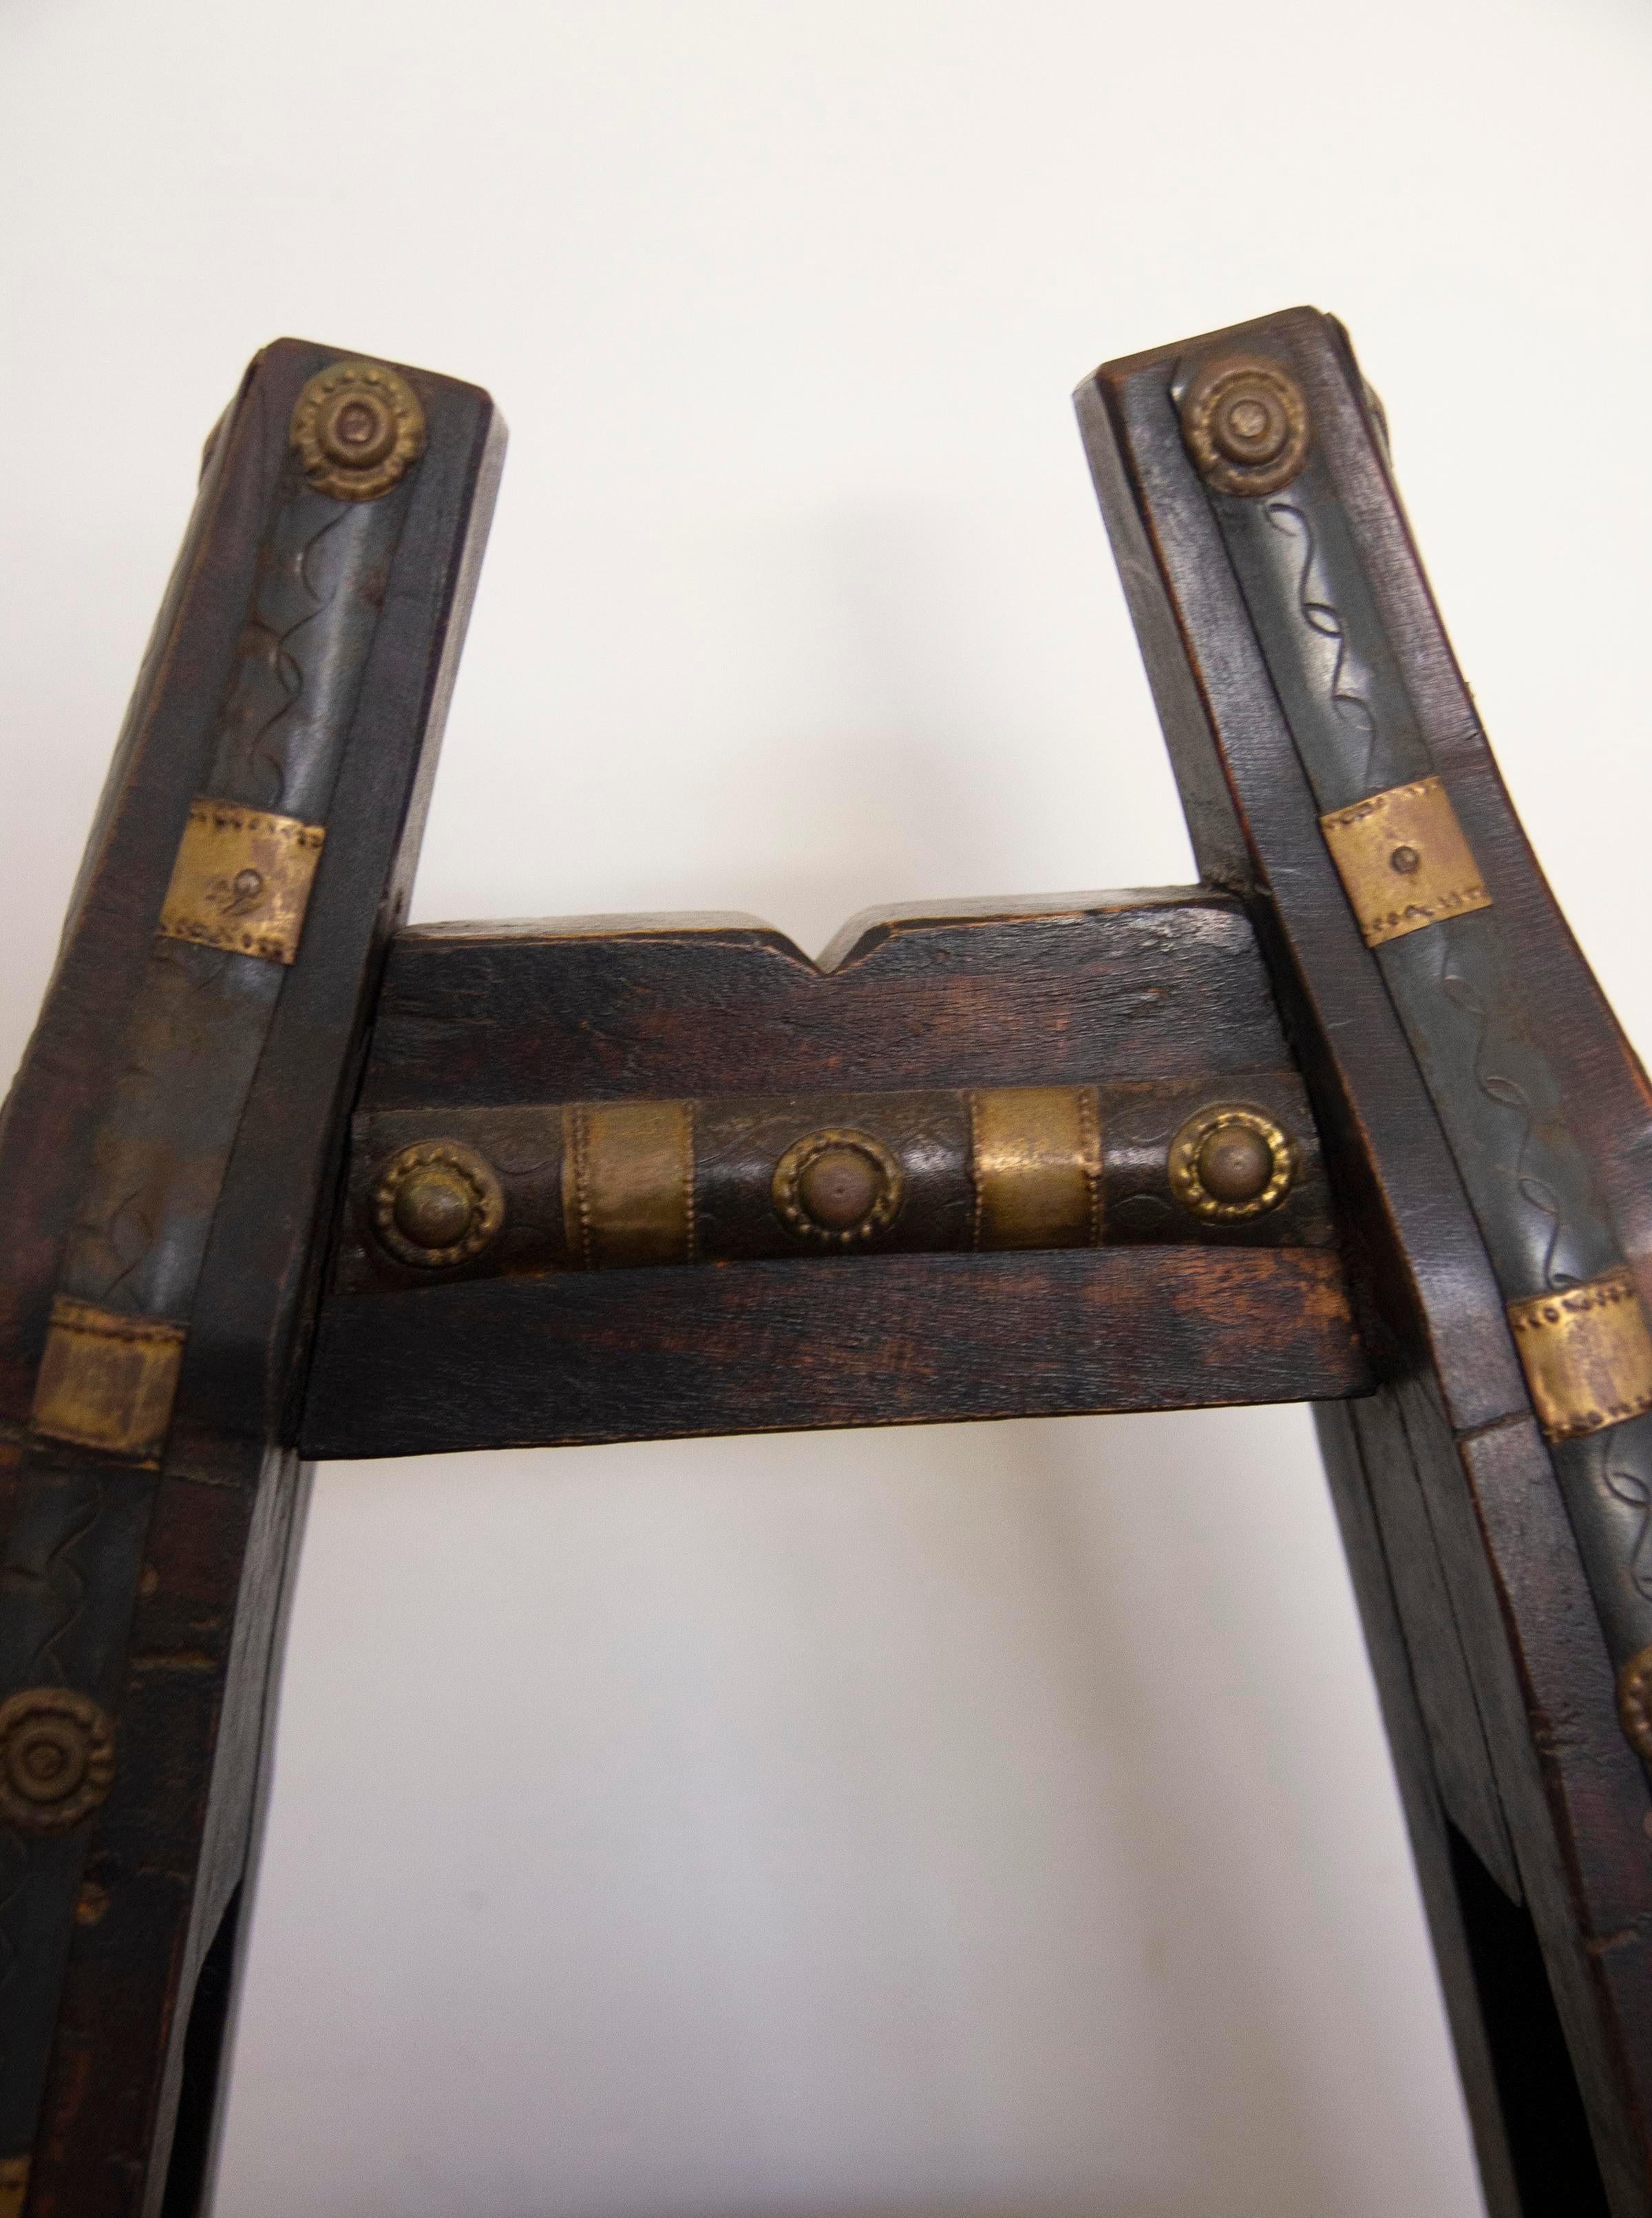 This item is antique, authentic and one of a kind. 
Gorgeous Indian rosewood with brass details.

This item includes restricted materials and cannot be sold outside of the contiguous United States.